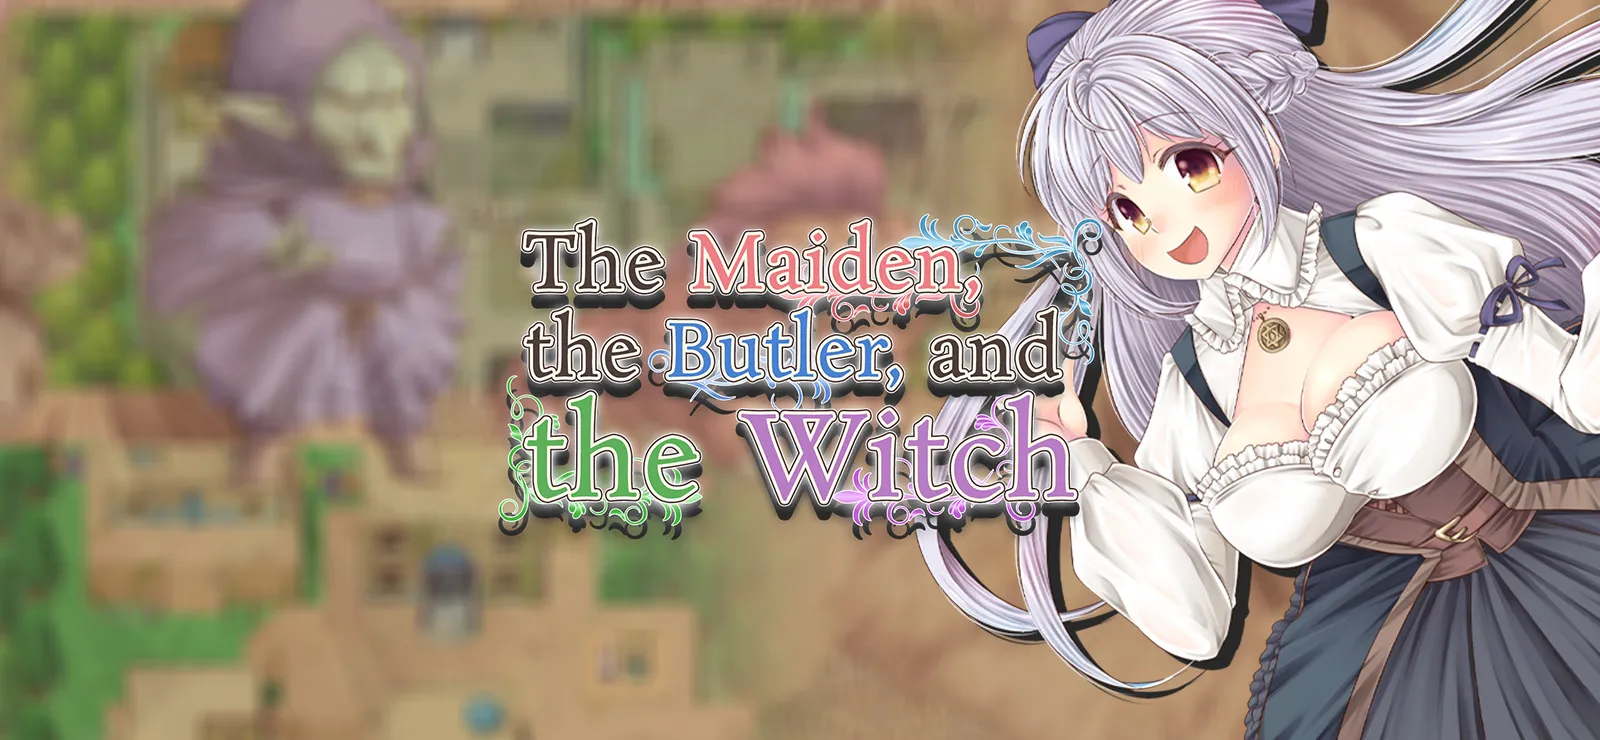 Download The Maiden the Butler and the Witch-GOG | MrPcGamer